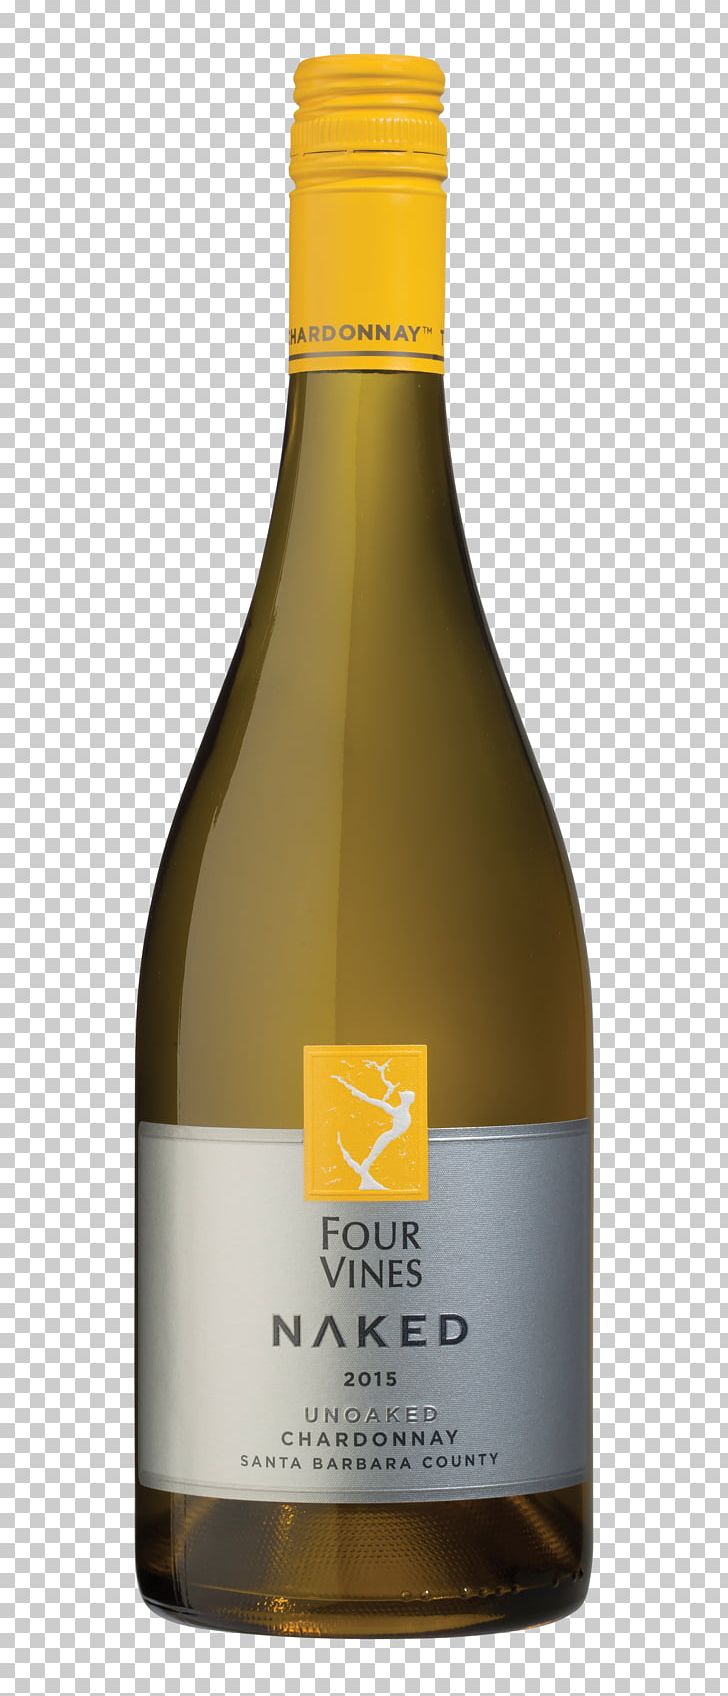 Champagne White Wine Chardonnay Common Grape Vine PNG, Clipart, Alcoholic Beverage, Beer Bottle, Bottle, Champagne, Chardonnay Free PNG Download